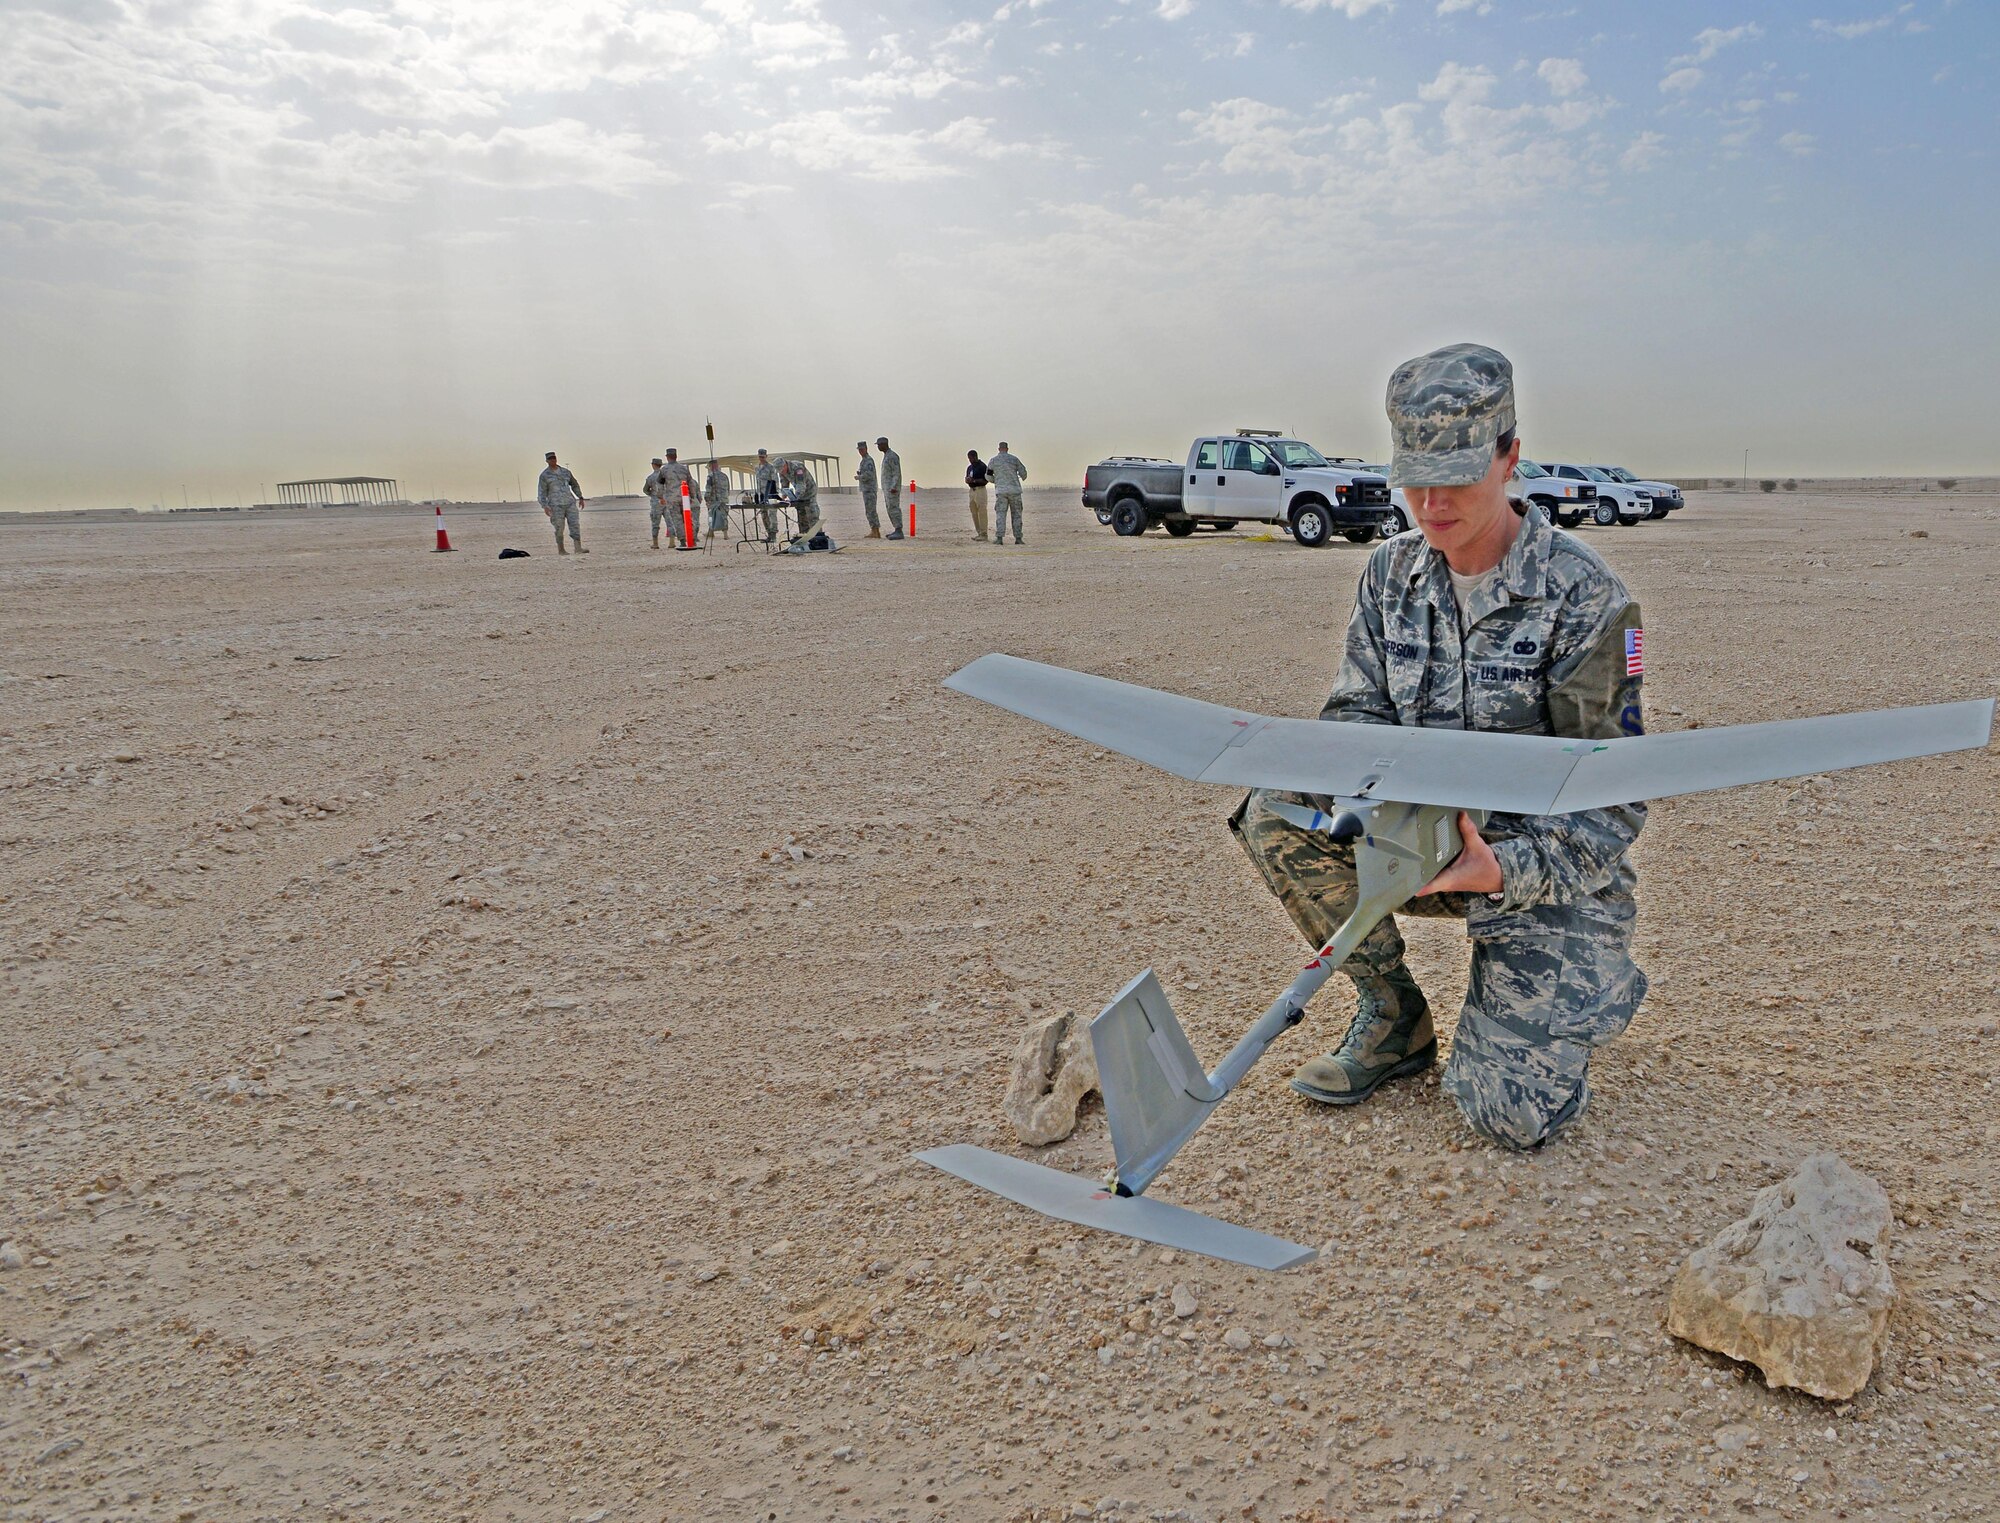 SSgt Elizabeth Henderson, 379th Expeditionary Security Forces Squadron, conducts pre-flight checks for an R-11B Raven at Al Udeid Air Base, Qatar, March 4, 2015, before an aerial demonstration for senior Qatari Air Force and 379th Air Expeditionary Wing leaders.  The RQ-11 Raven is a lightweight unmanned aircraft system that’s designed for rapid deployment and high-mobility for military operations. At Al Udeid, security forces Airmen use the Raven to support anti-terrorism measures like day or night aerial intelligence, surveillance, target acquisition, and reconnaissance. This is the first time since 2005 that the Raven has been used at Al Udeid. (Air Force photo by Master Sgt. Kerry Jackson) 